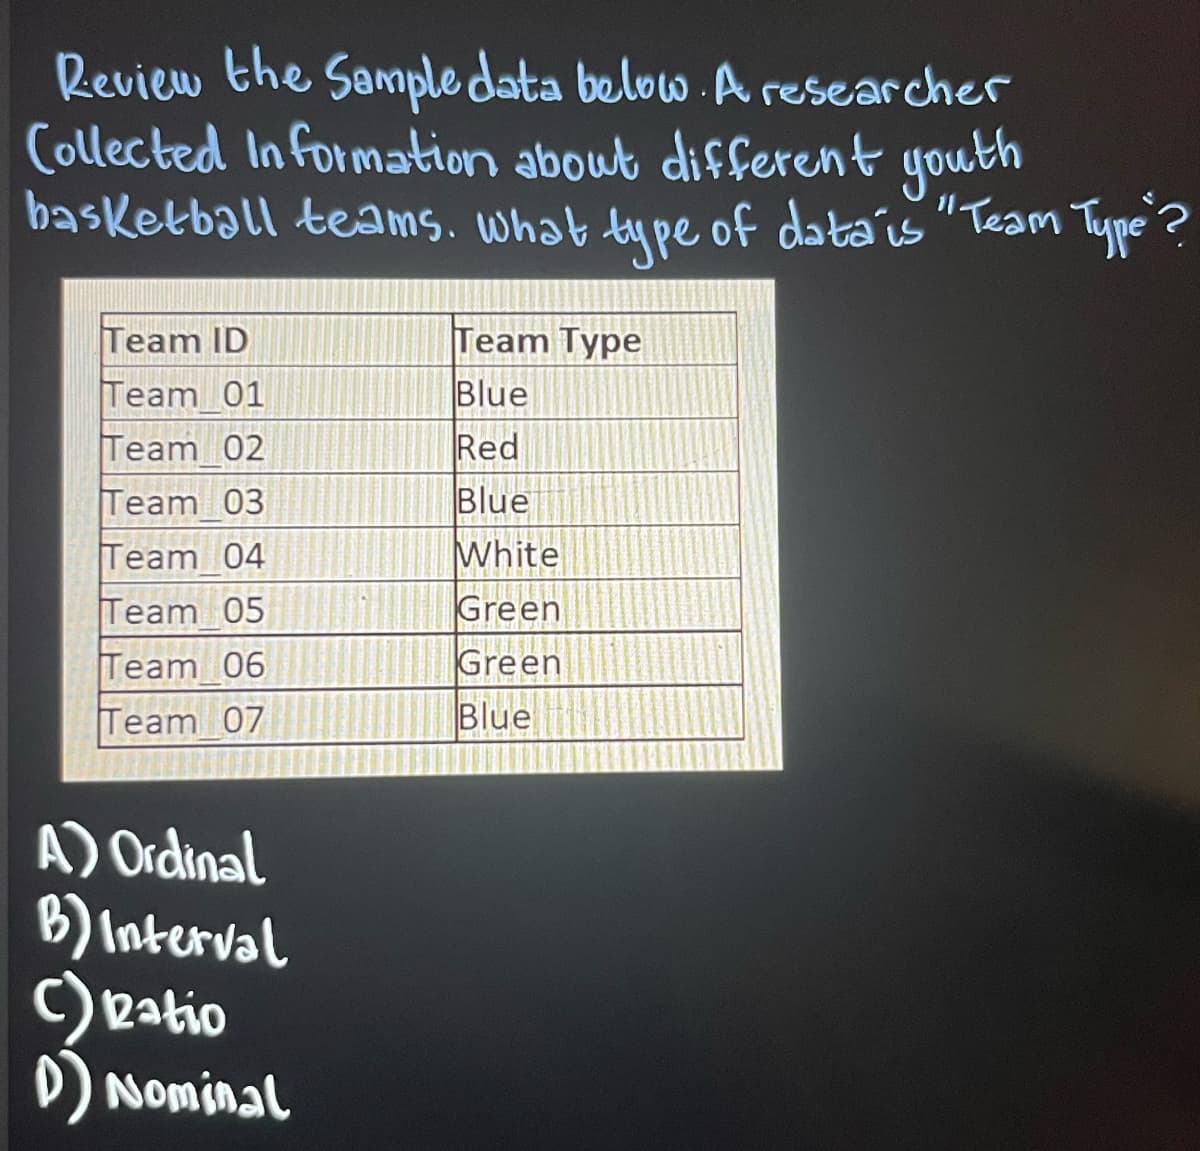 Review the Sample data below. A researcher
Collected In formation about different youth
basketball teams. what type of data'is
"Team Type?
Team Type
Blue
Team ID
Team 01
Team_02
Team 03
Red
Blue
Team 04
White
Team 05
Green
Team 06
Green
Team 07
Blue
A) Ordinal
B) Interval
C)eatio
DNominal
